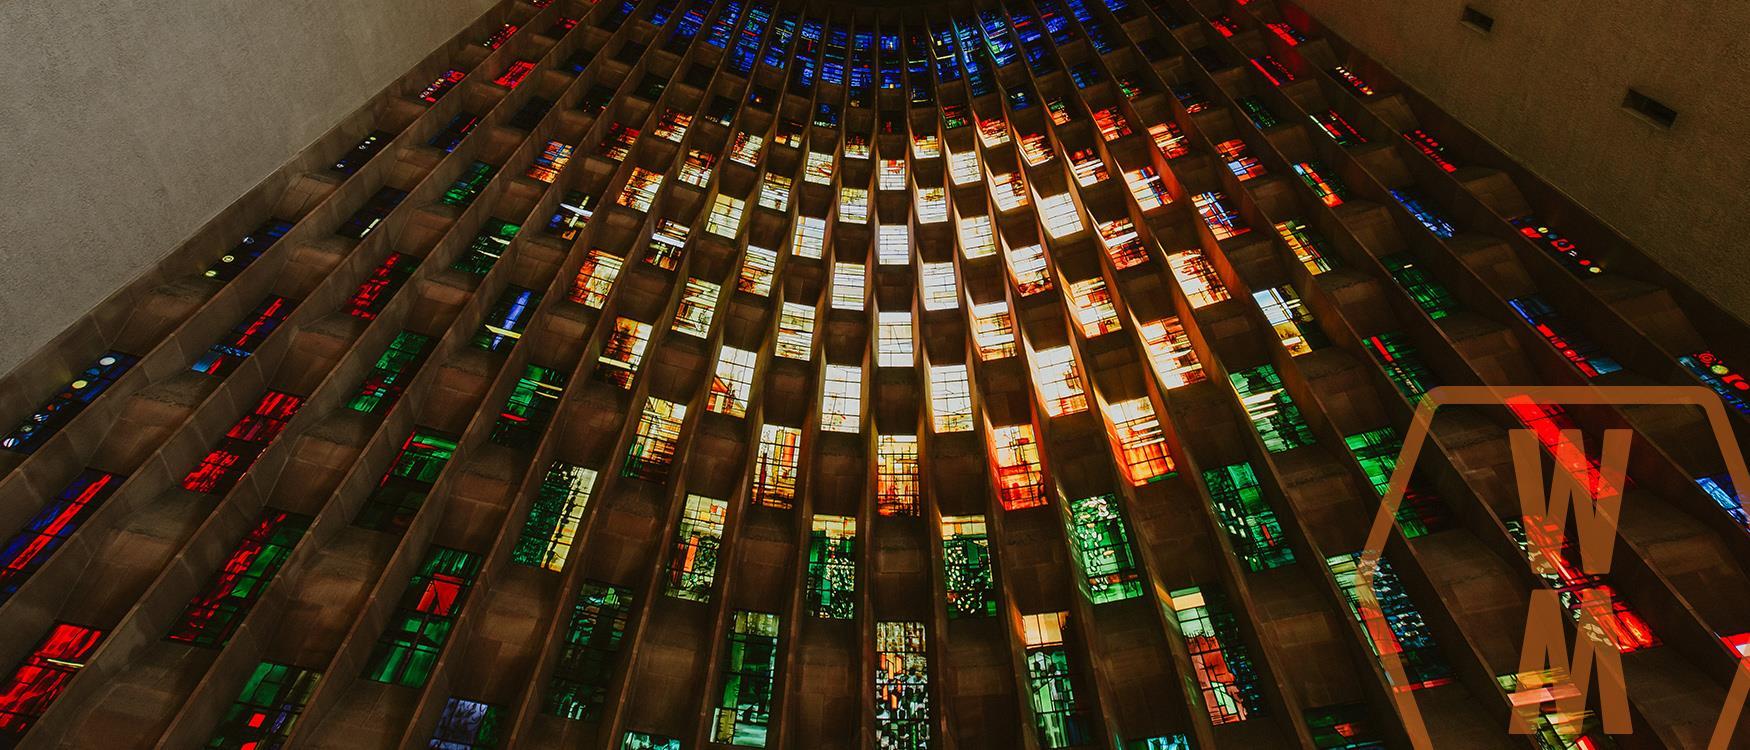 Coventry Cathedral - Coventry’s fortunes and story are closely associated to the story of its Cathedrals.